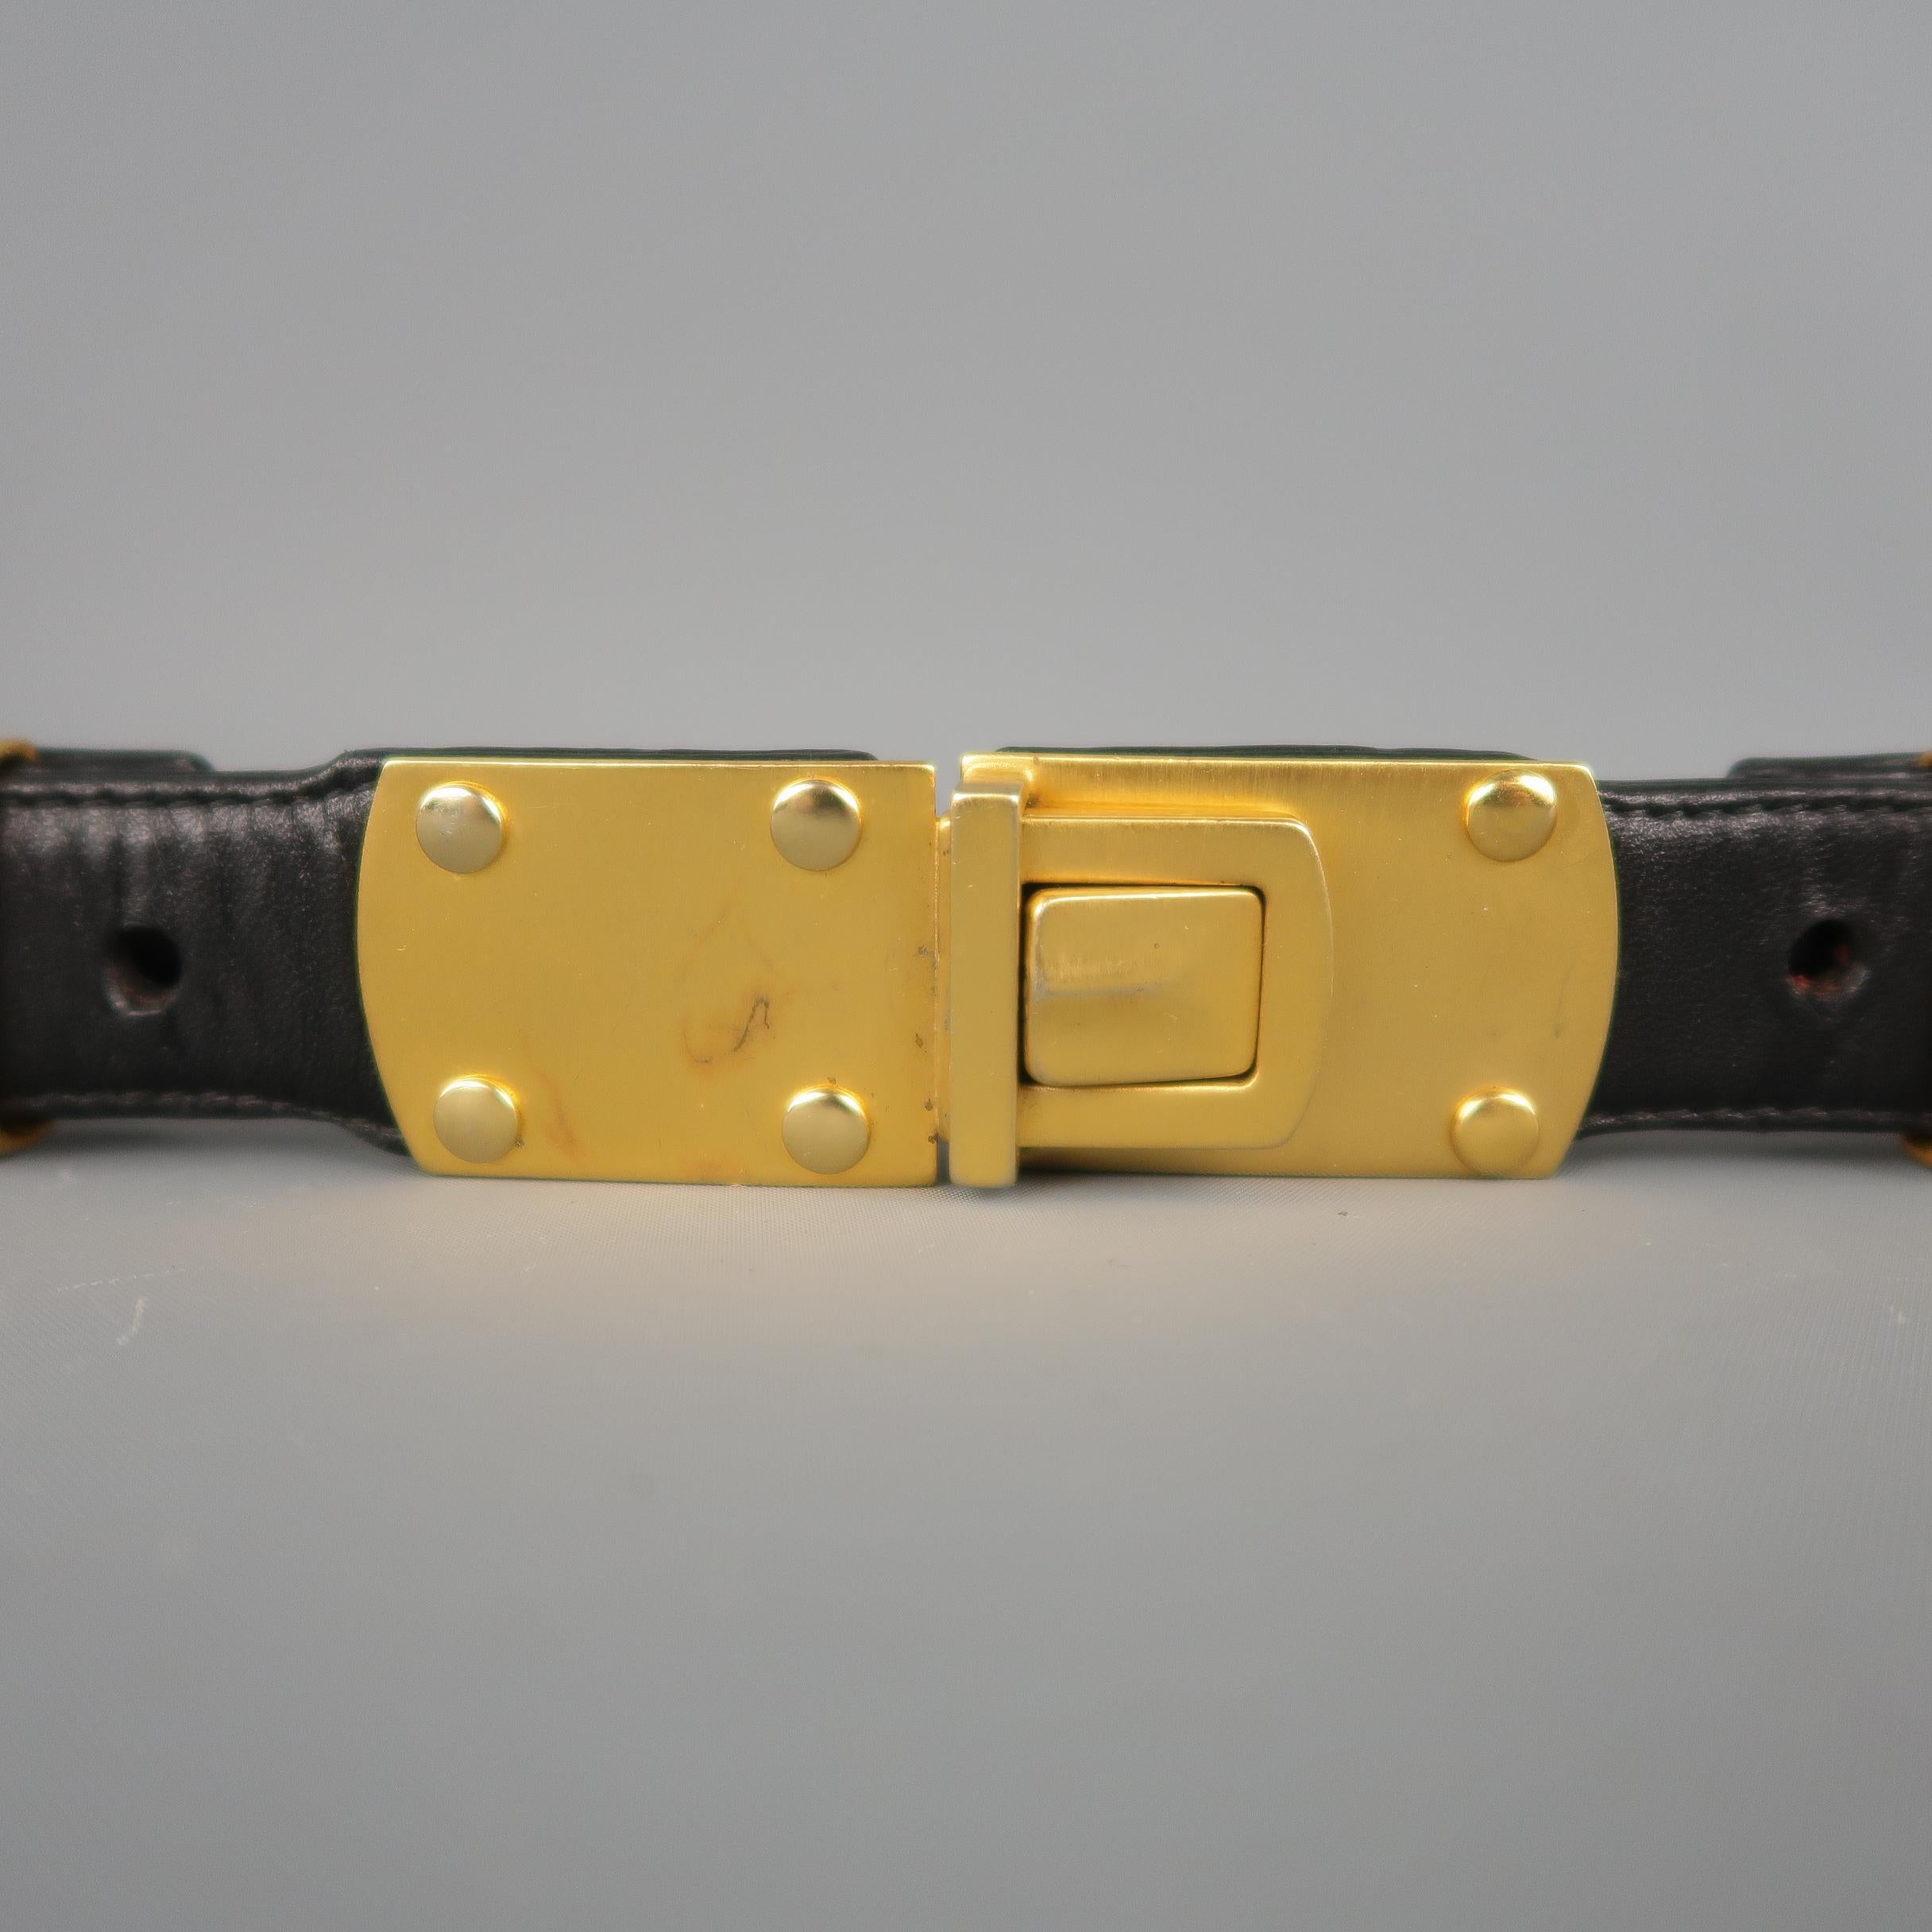 Vintage DONNA KARAN waist belt features a three strand yellow gold tone chain strap with leather detailed clasp closure.
 
Good Pre-Owned Condition.
Marked: M
 
Measurements:
 
Width: 1.5 in.
Fits: 28 in.